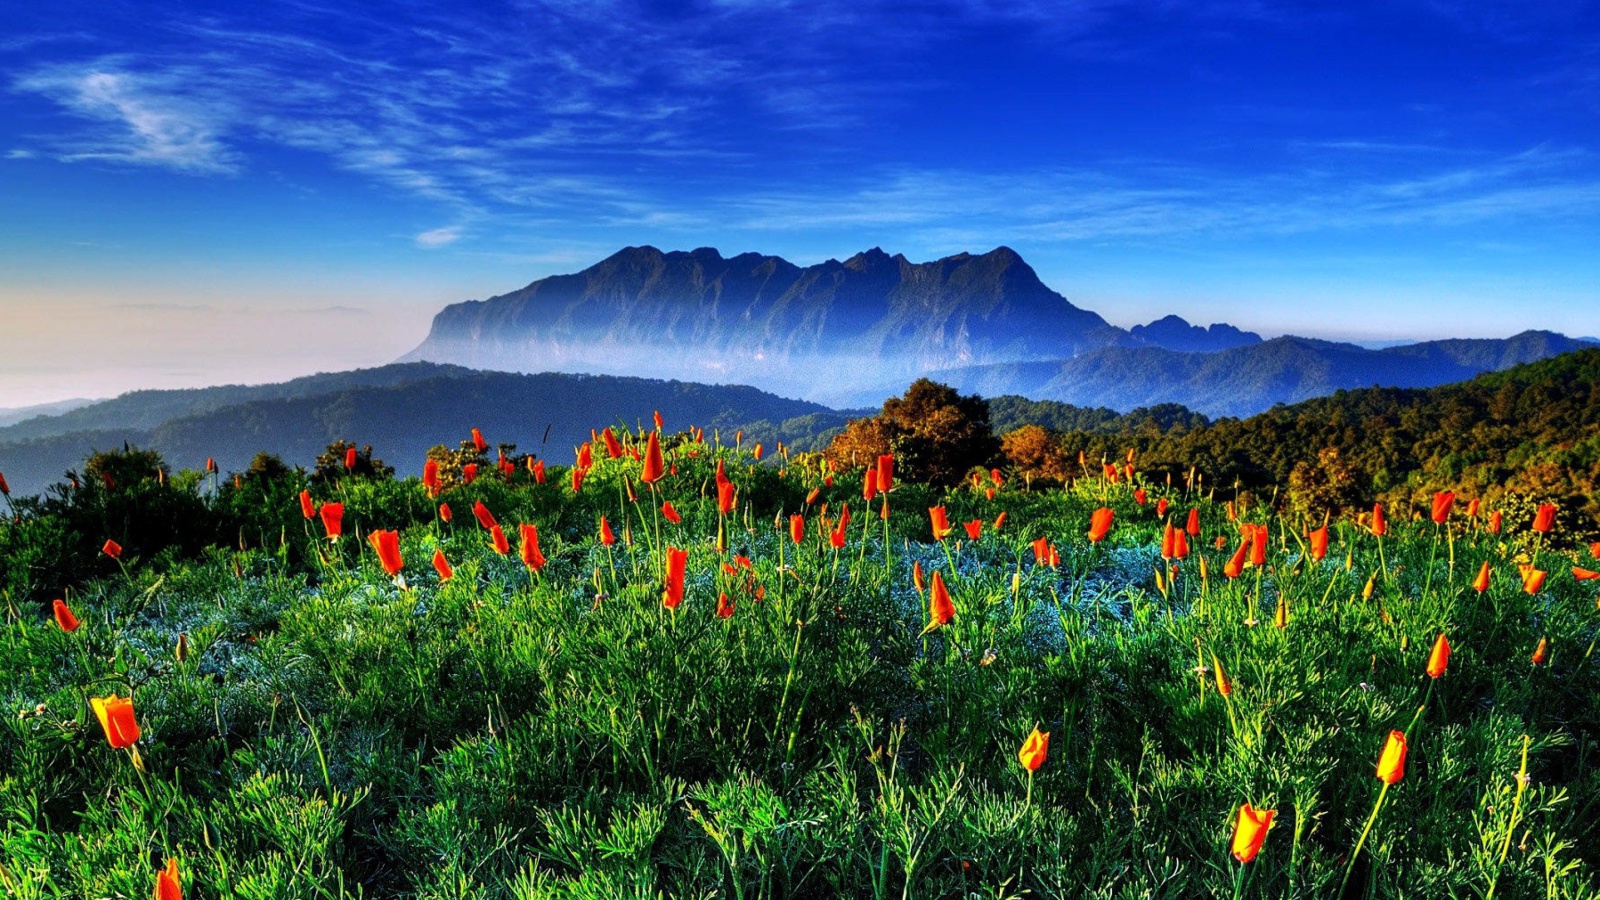 Spring has come to the mountains Thailand Chiang Dao screenshot #1 1600x900